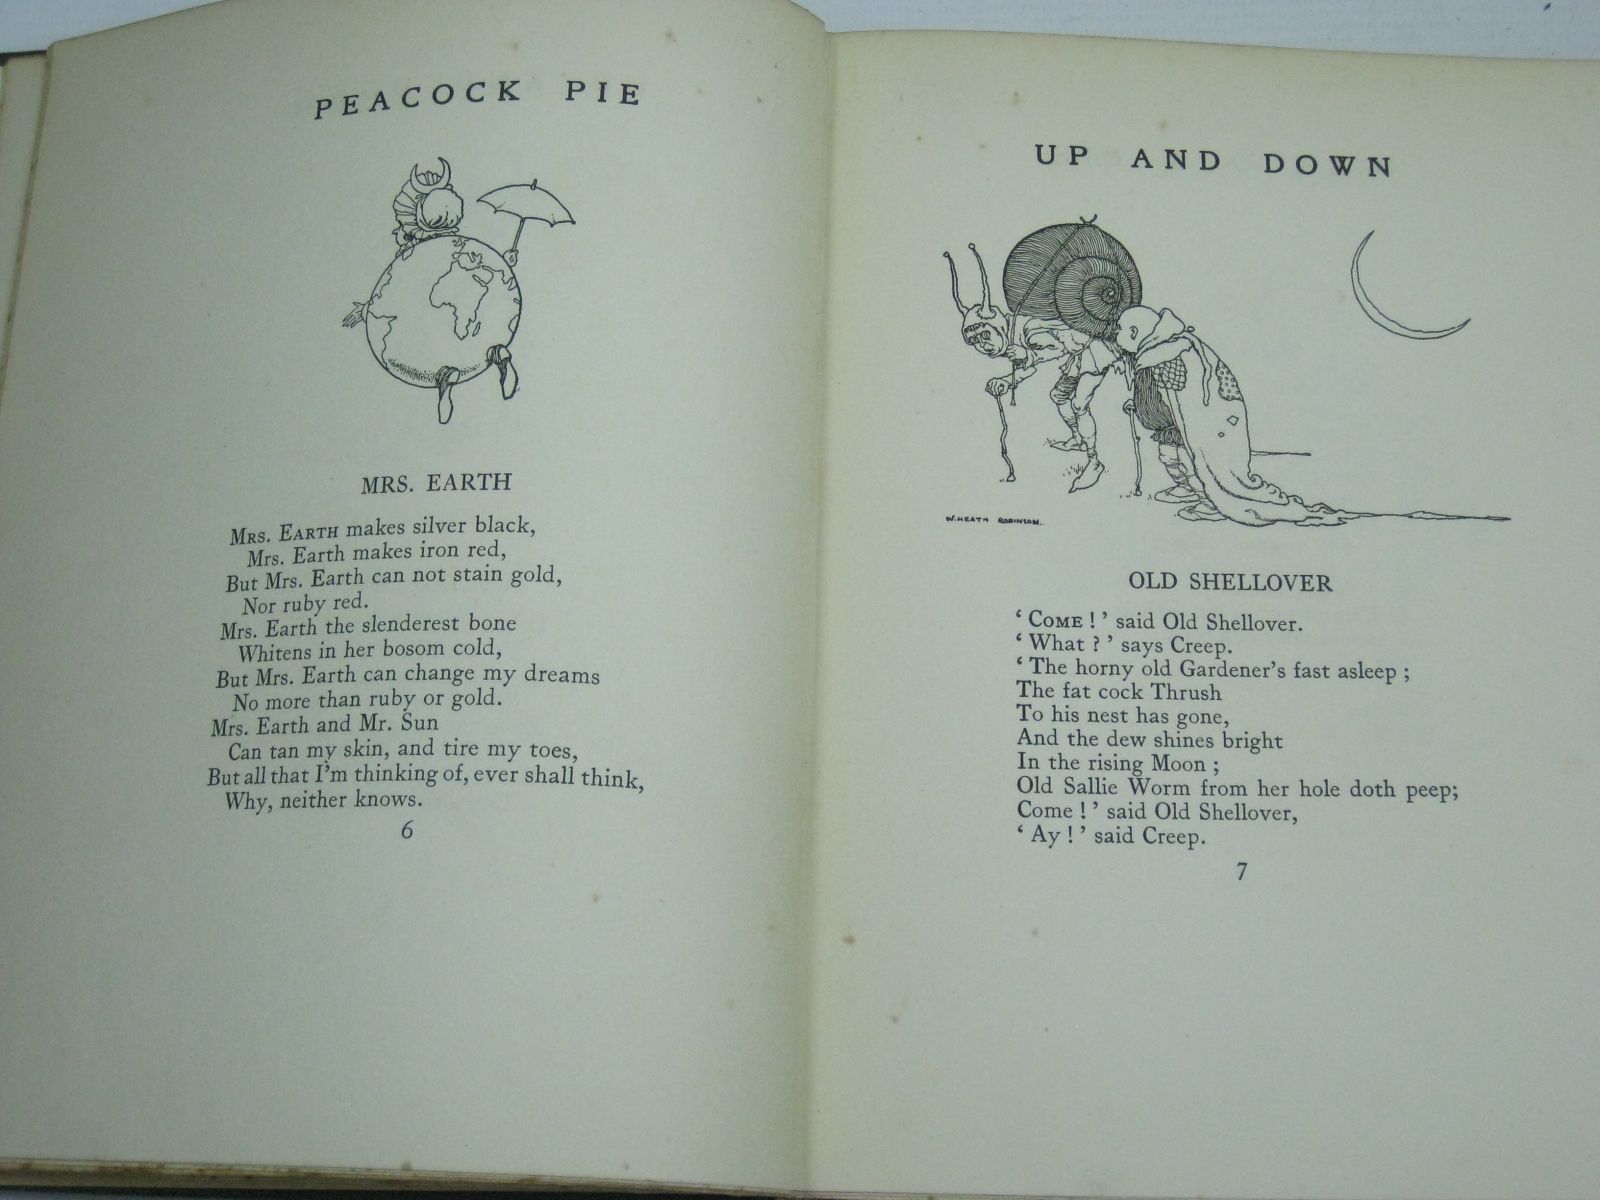 Photo of PEACOCK PIE - A BOOK OF RHYMES written by De La Mare, Walter illustrated by Robinson, W. Heath published by Constable and Company Ltd. (STOCK CODE: 1405775)  for sale by Stella & Rose's Books